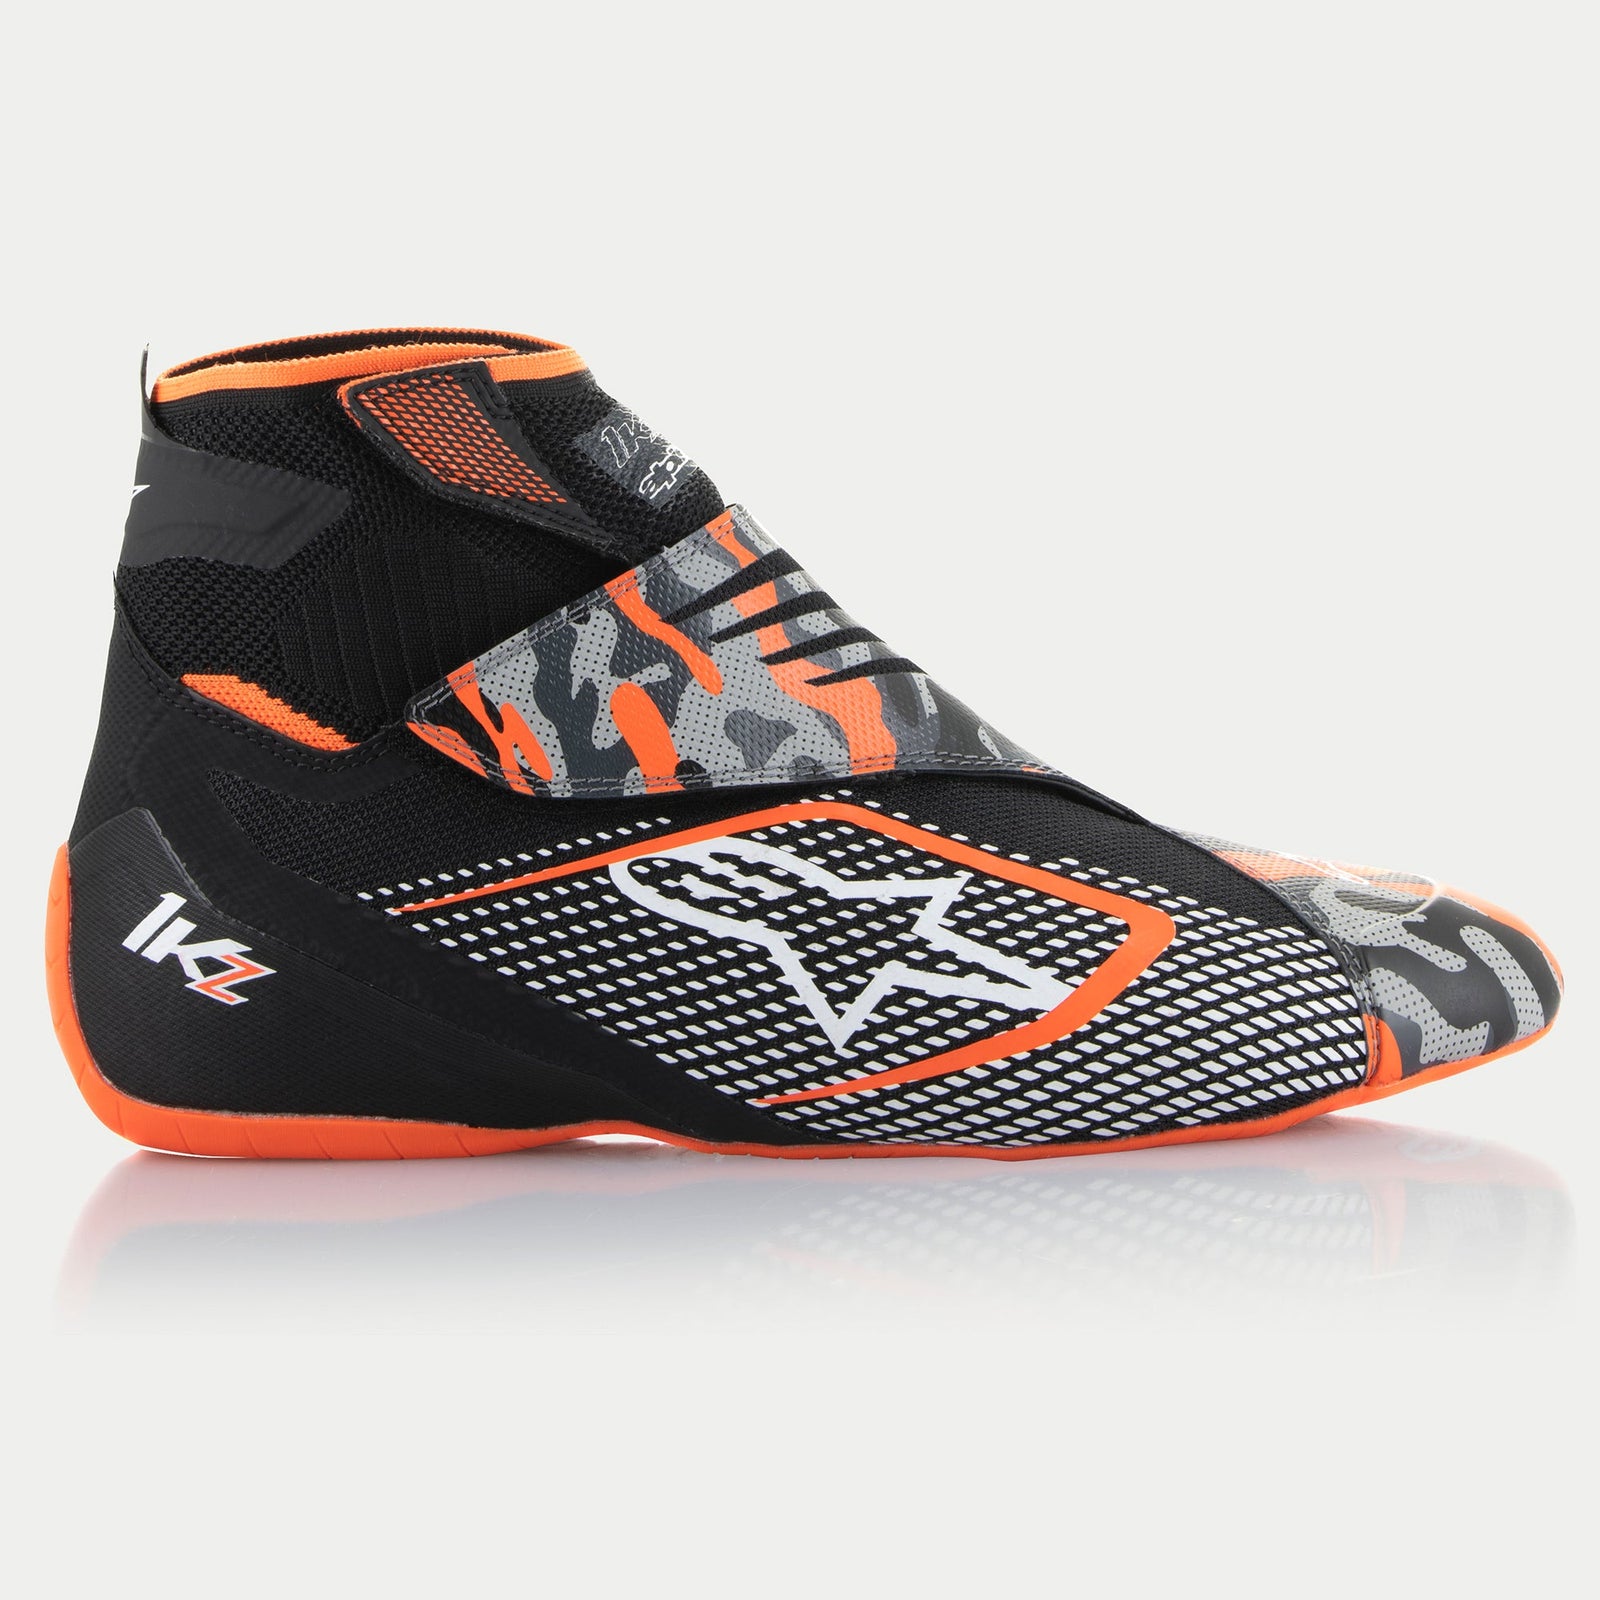 Limited Edition Tech-1 KZ V2 Shoes